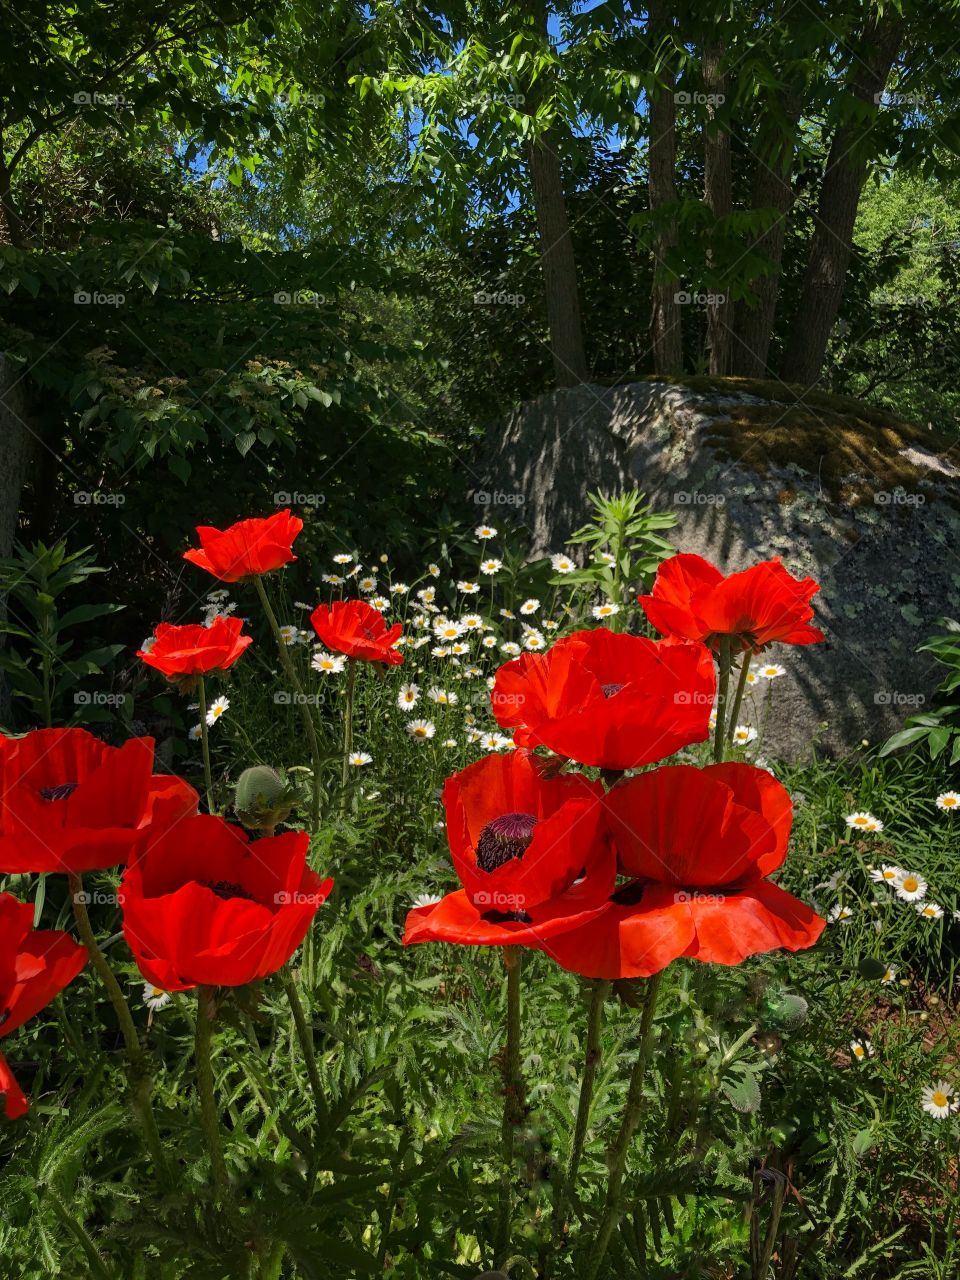 Poppies and daisies again the backdrop of trees. What a beautiful contrast. I shot this in my moms garden. 